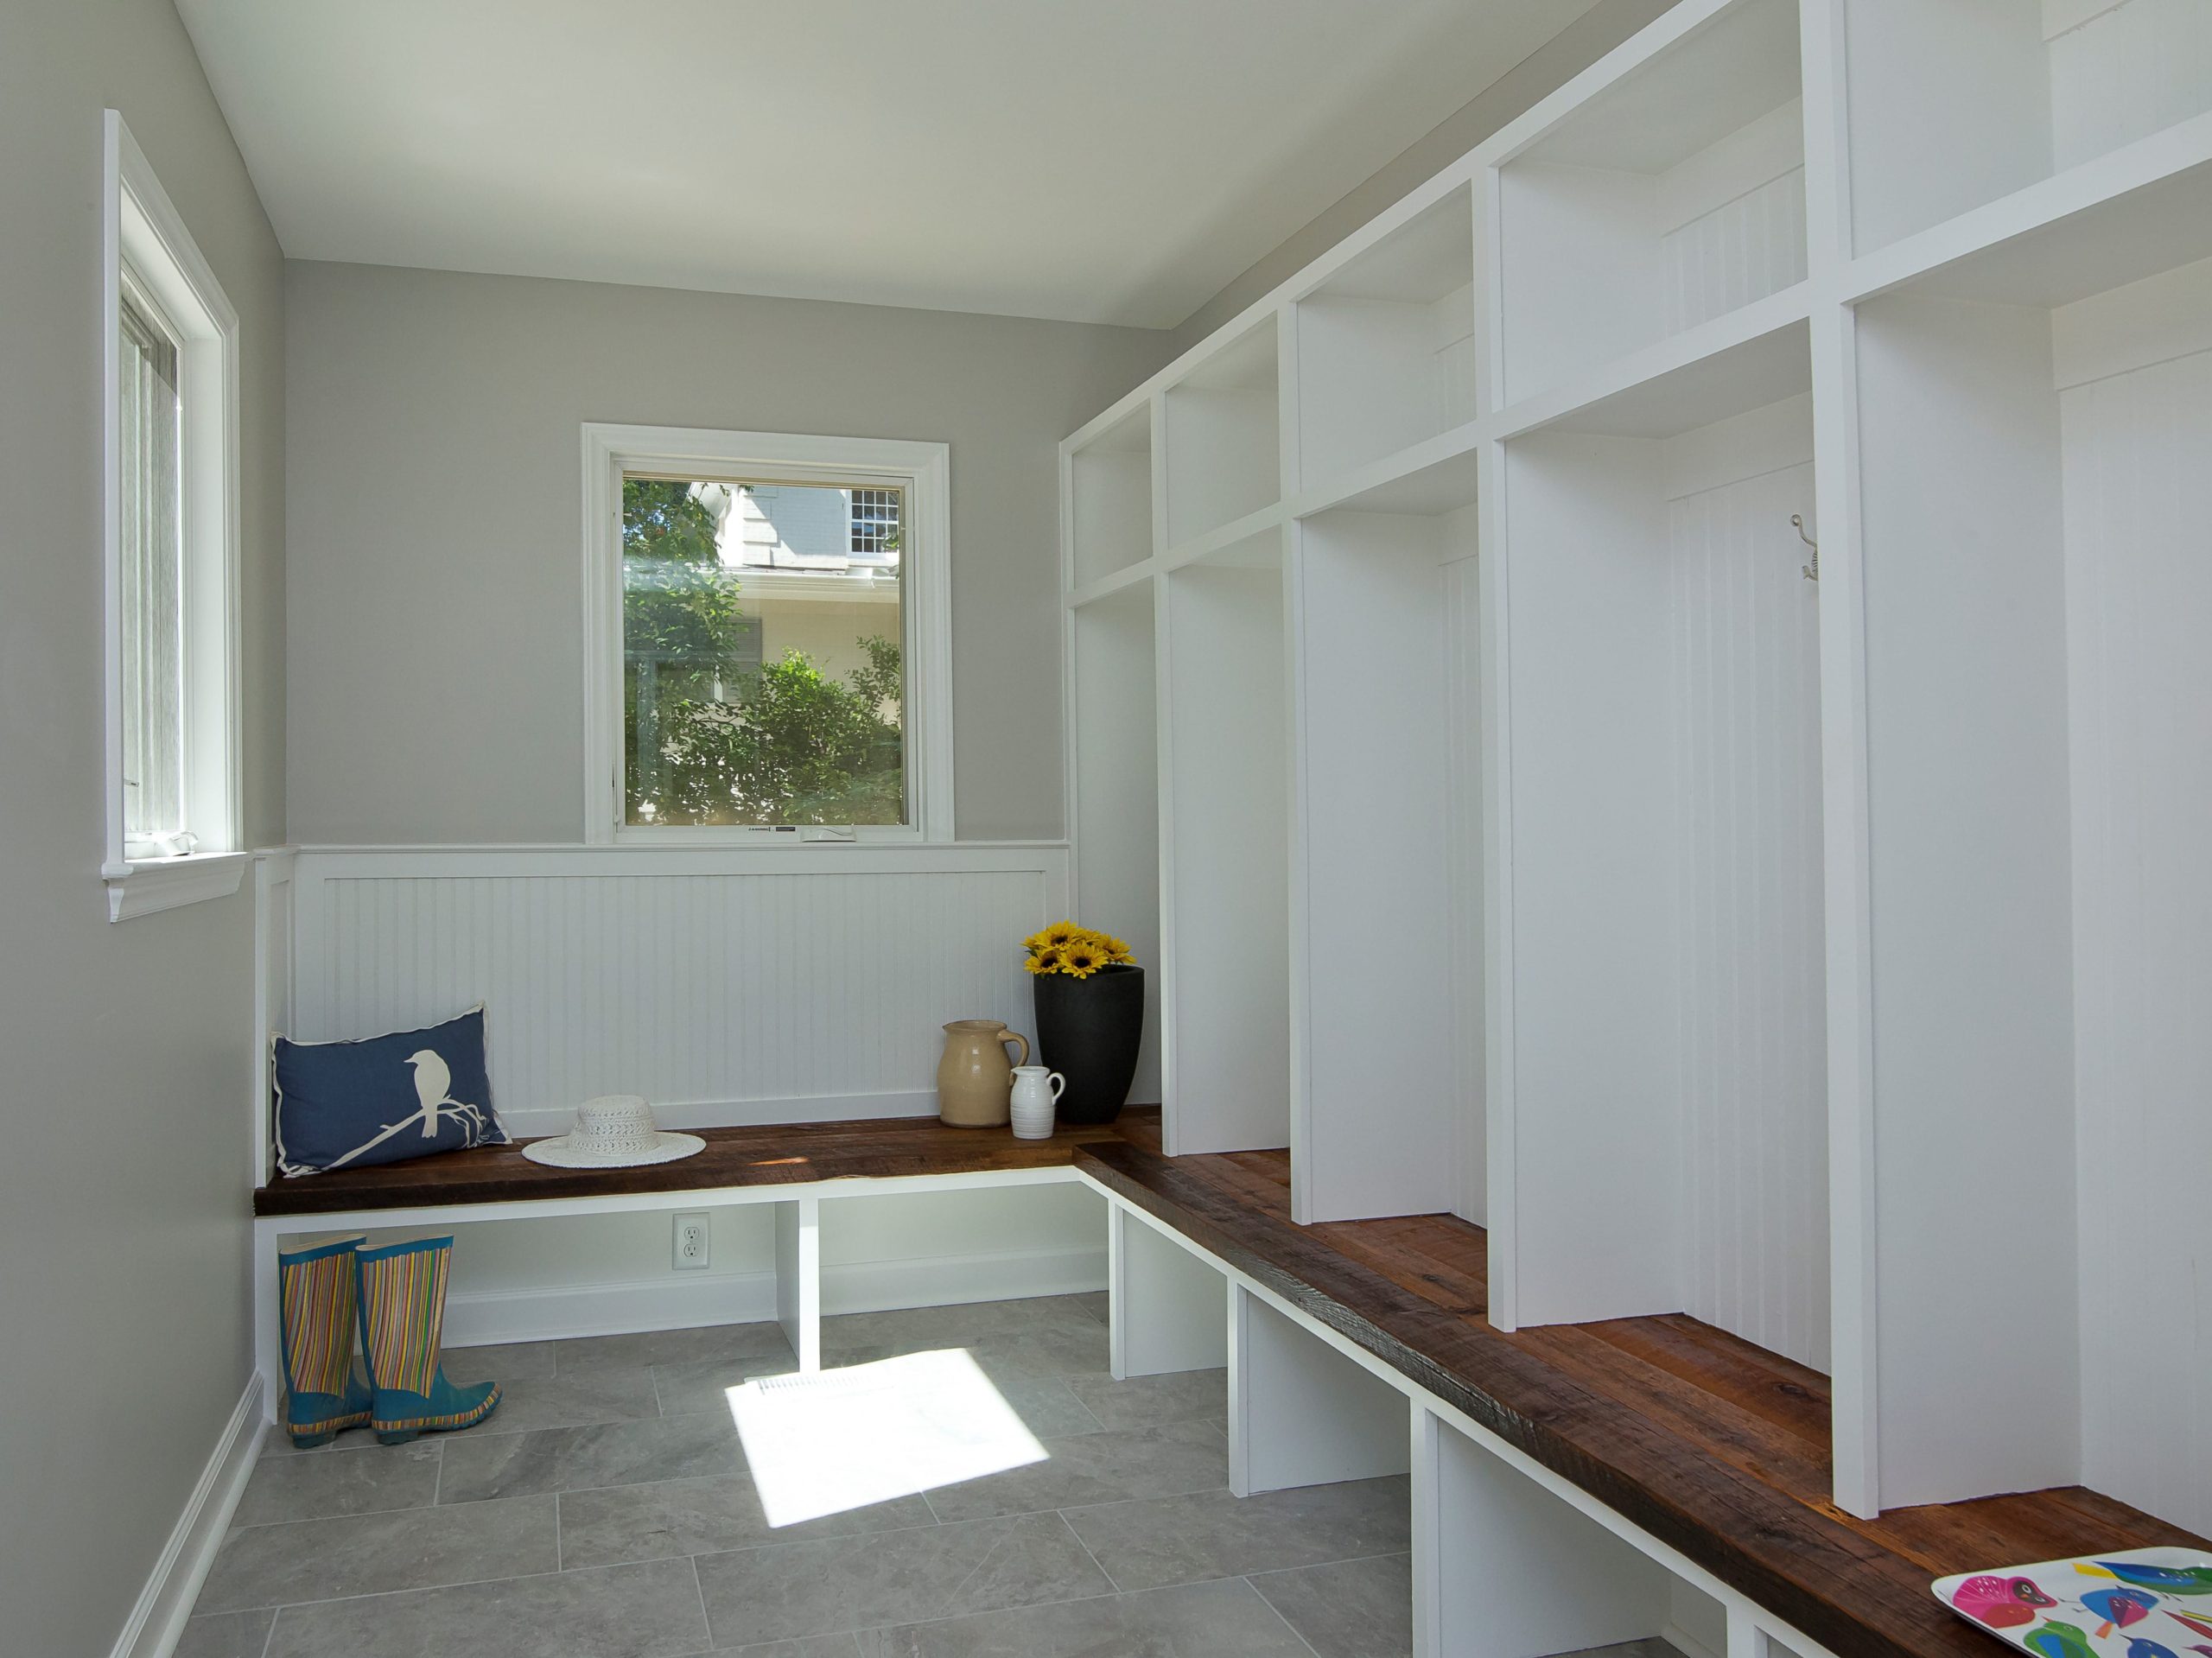 A minimal and elegant mudroom with built-in bench seating, shoe storage and hooks for hanging items